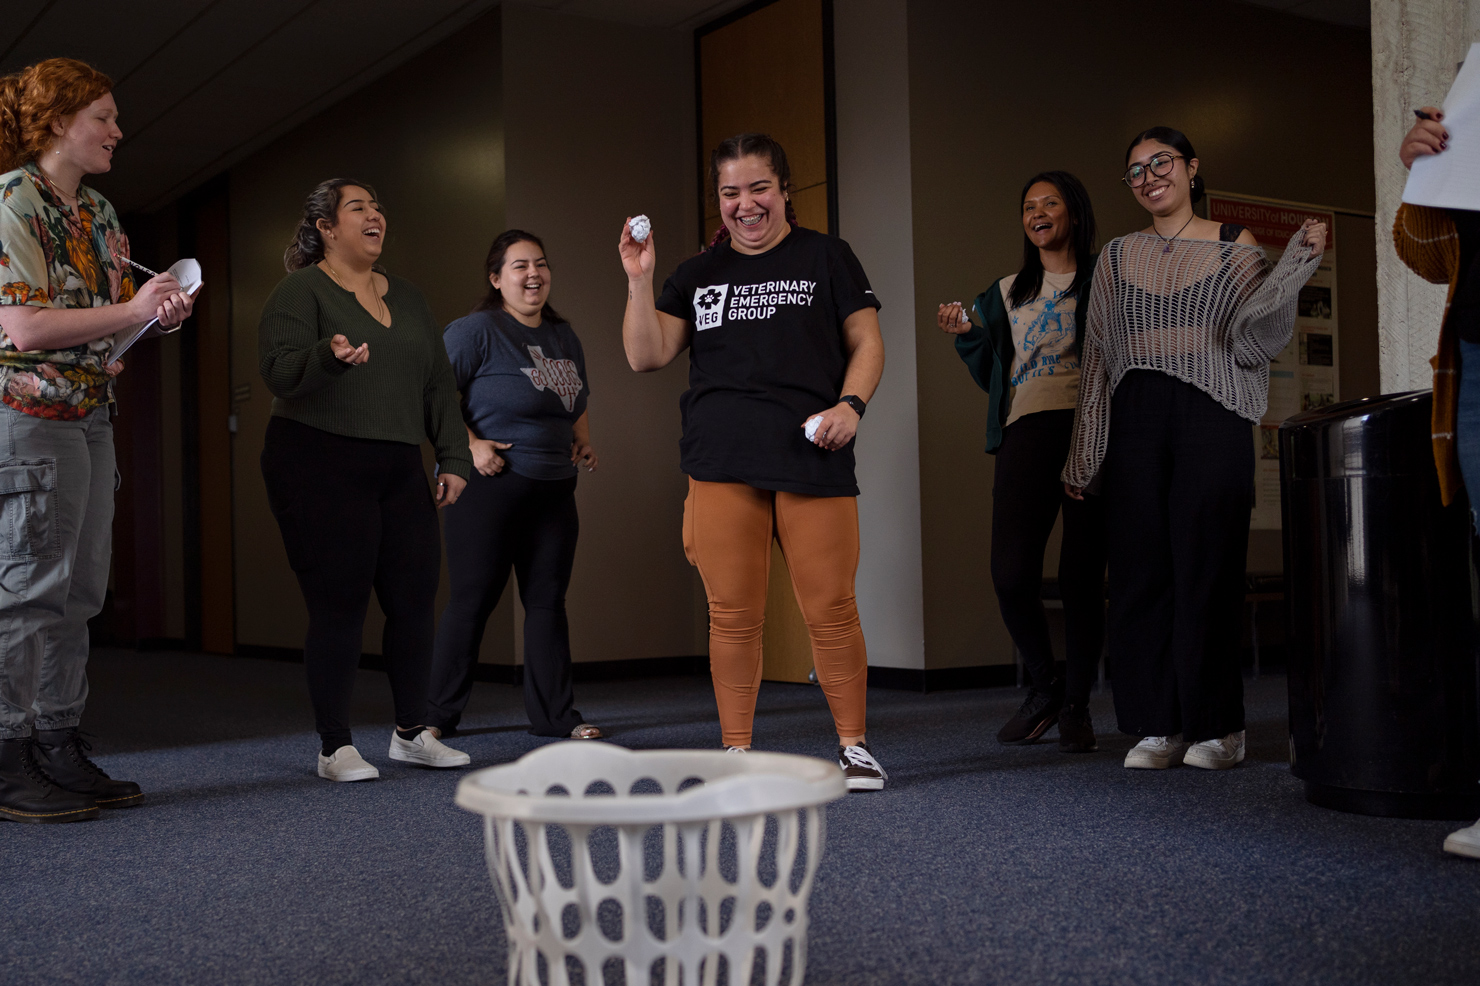 Kamila Salazar, center, throws a paper ball during an exercise as fellow classmates look on during a teacher-certification class with seniors at the University of Houston.